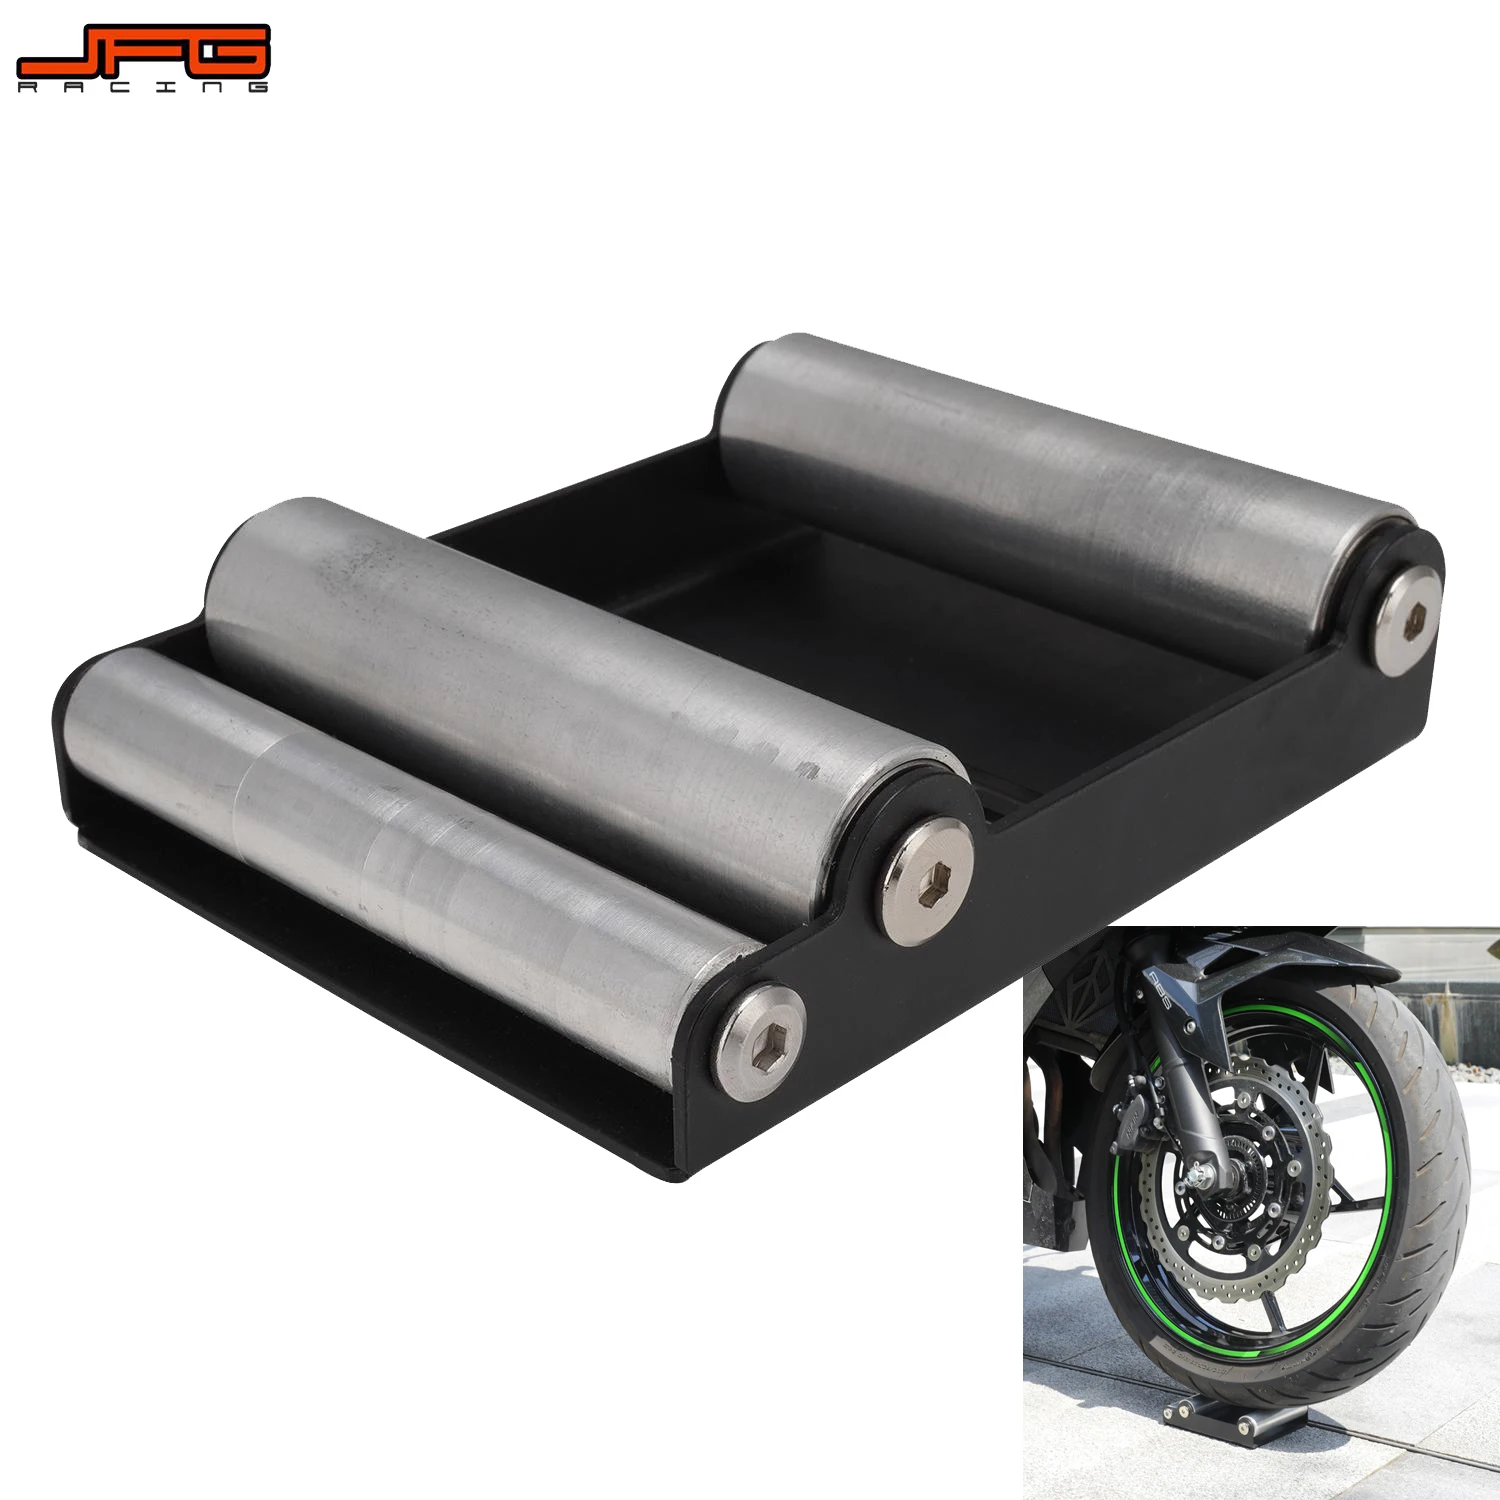 Motorcycle Universal Tire Cleaning Stand Tire Wash Bracket Portable Chain Clean Durable Roller Ramp Lift For KTM Kawasaki Suzuki